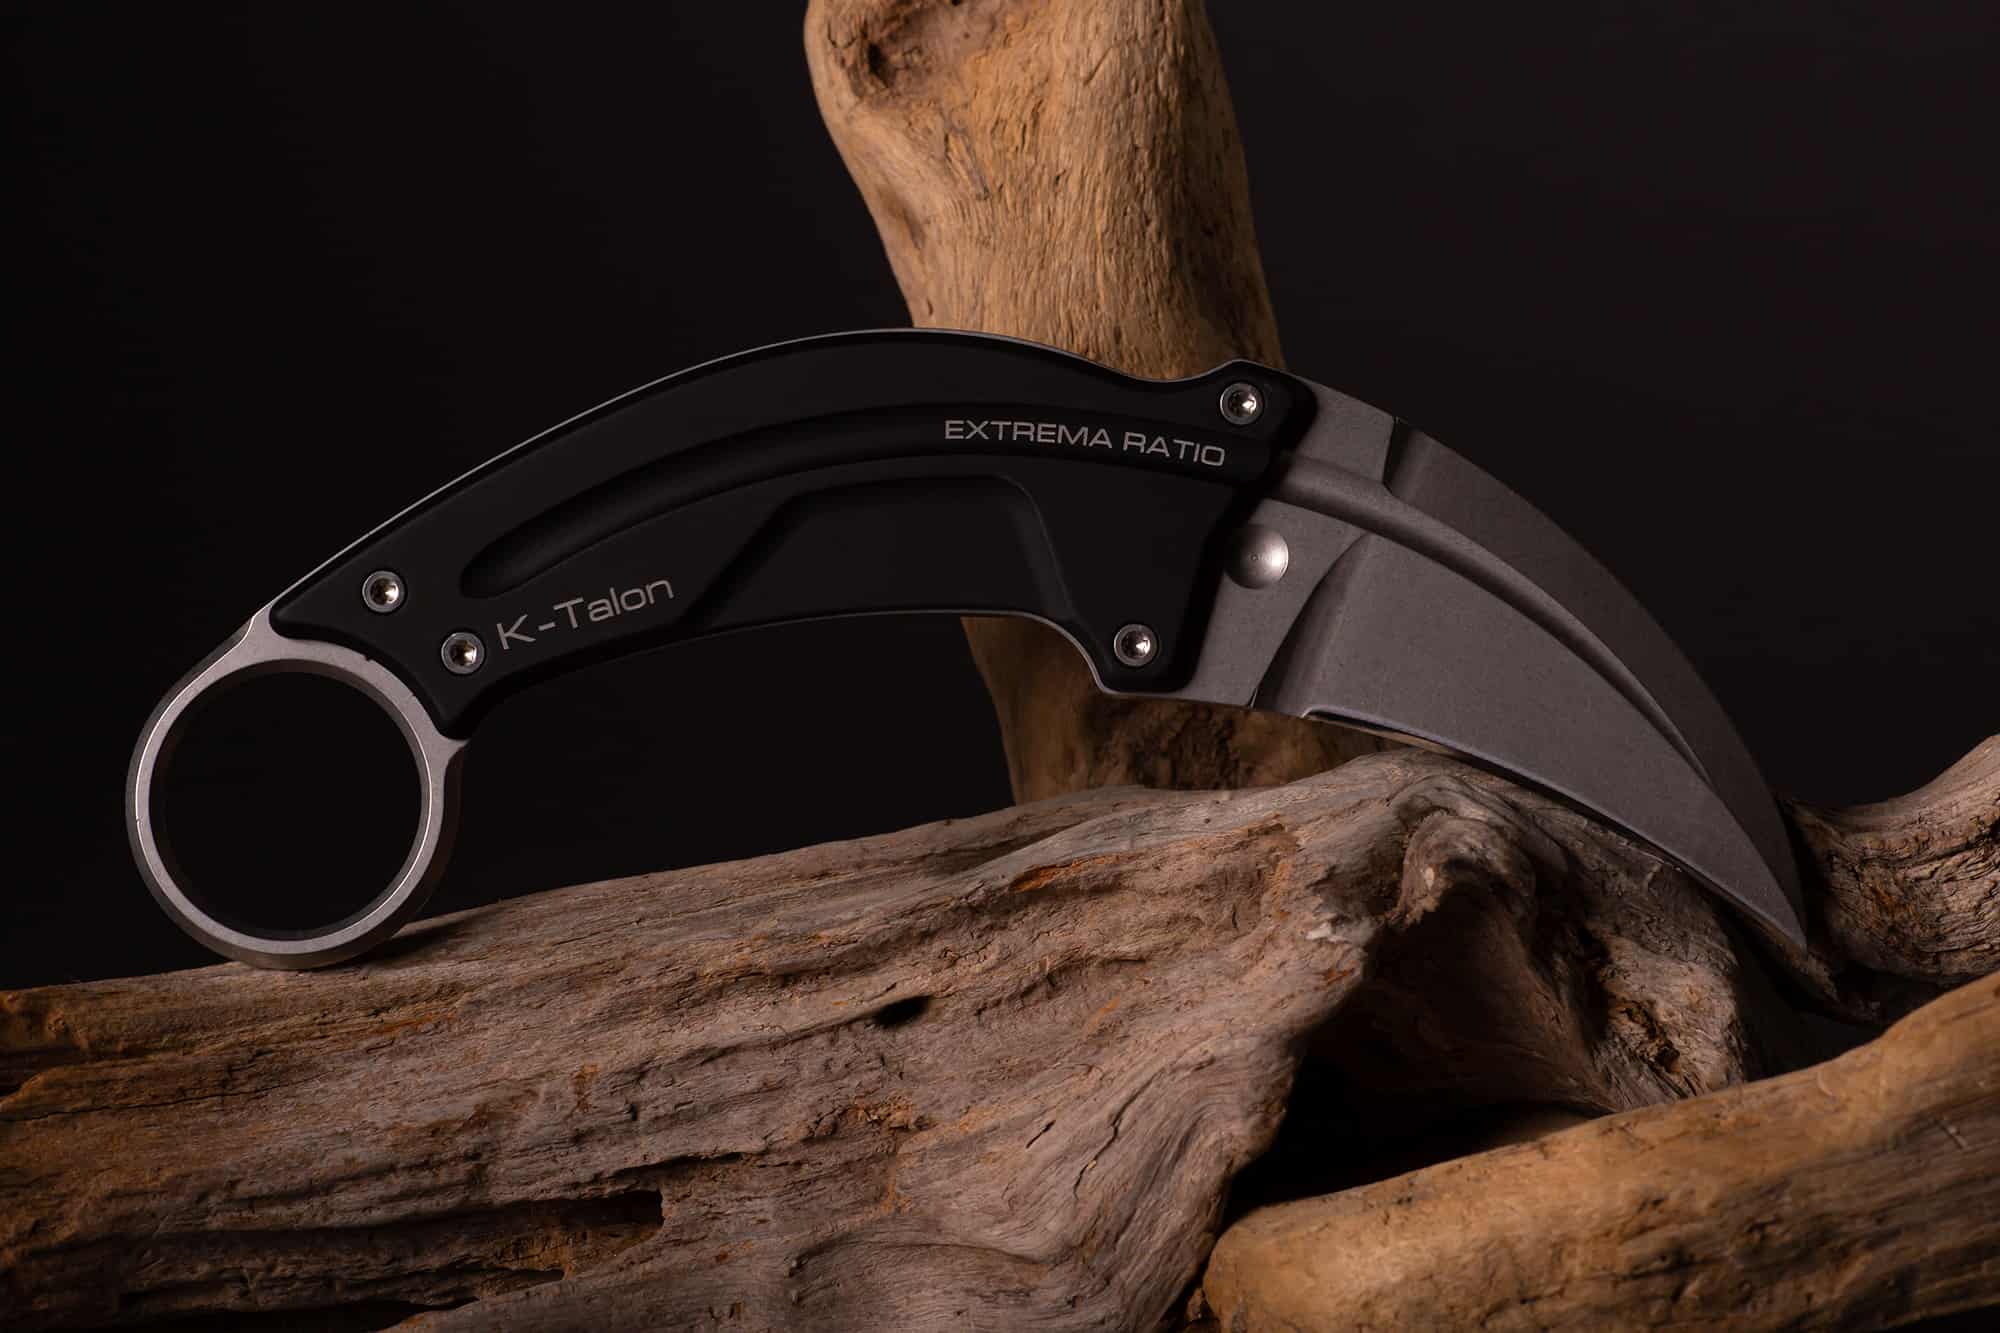 Extrema Ratio’s Mid-Year Release is a Fixed Blade Karambit